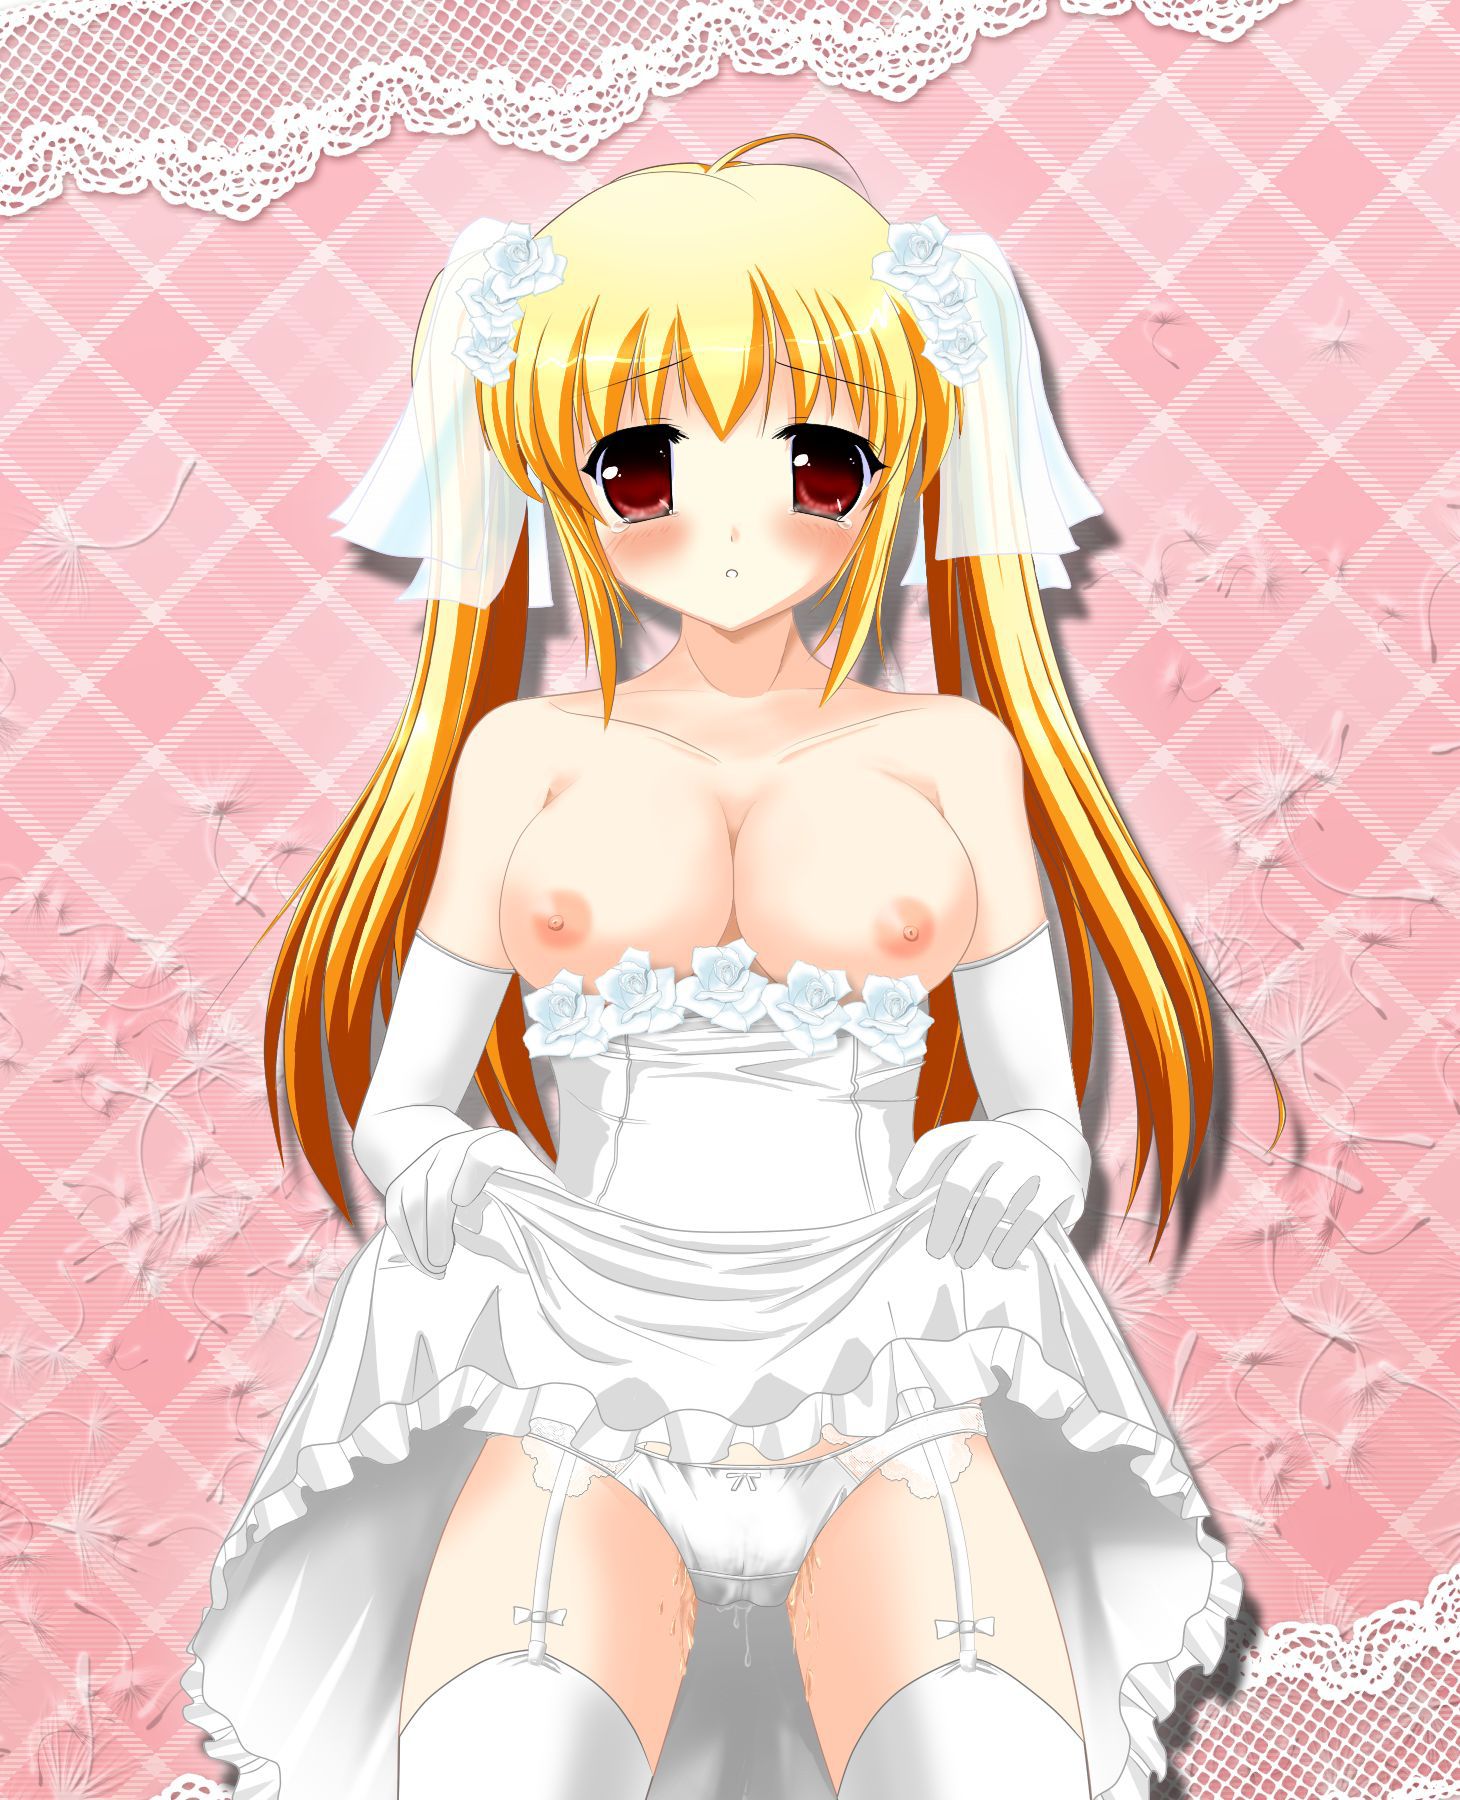 Secondary images of the girl wearing a wedding dress part 3 50 sheets [erotic and non-erotic] 38